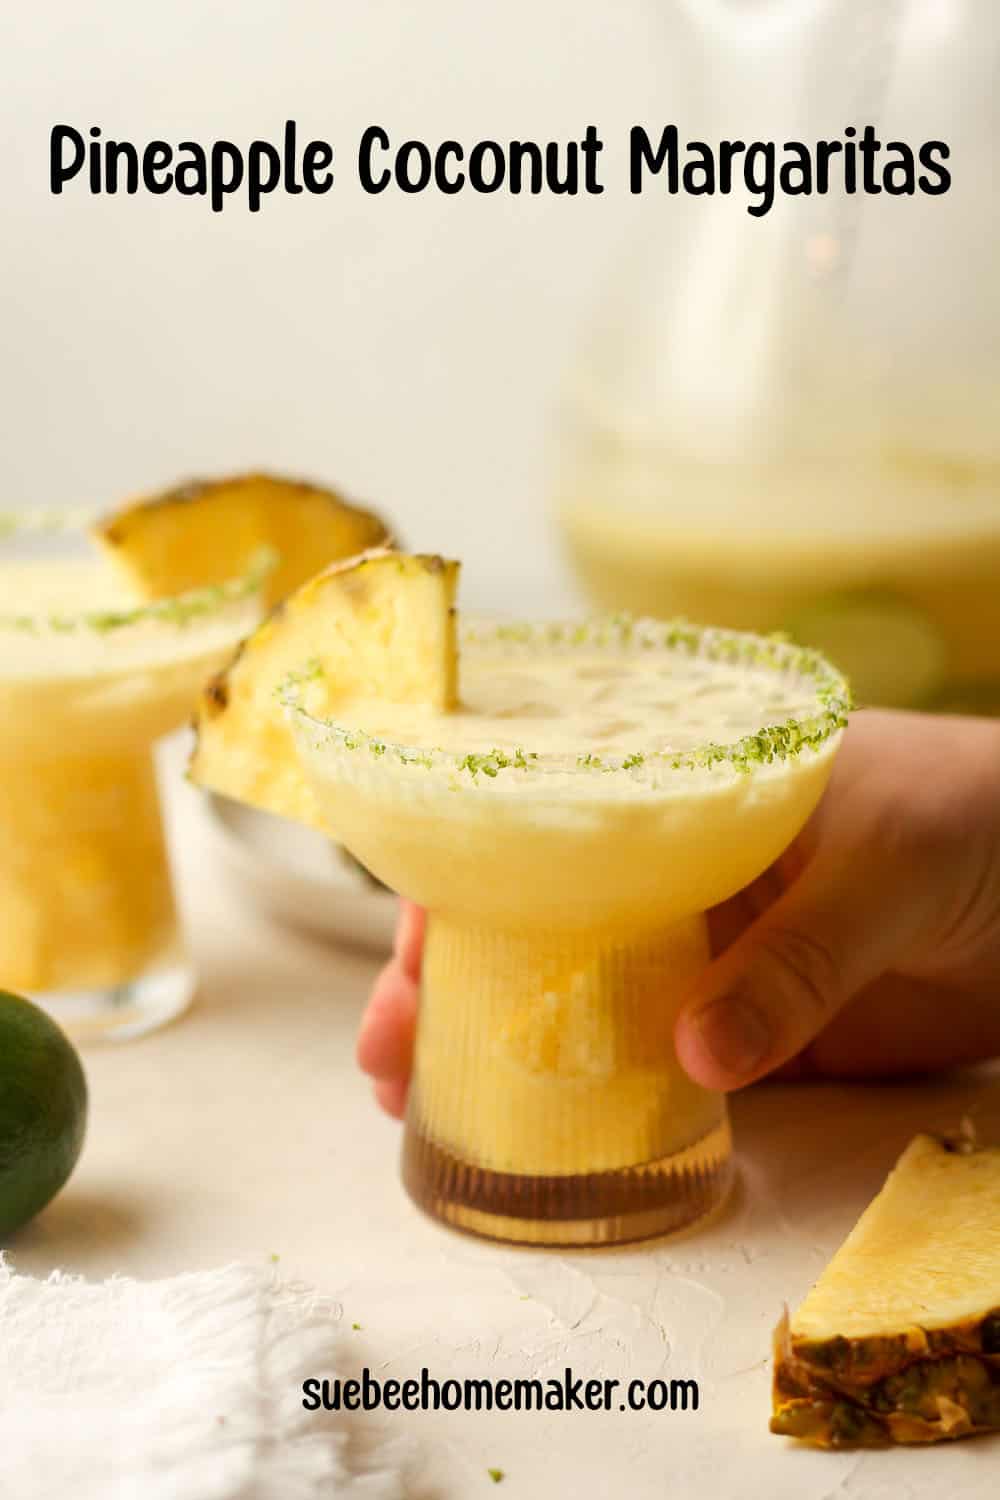 A hand on a pineapple coconut margarita with a lime/salt rim.